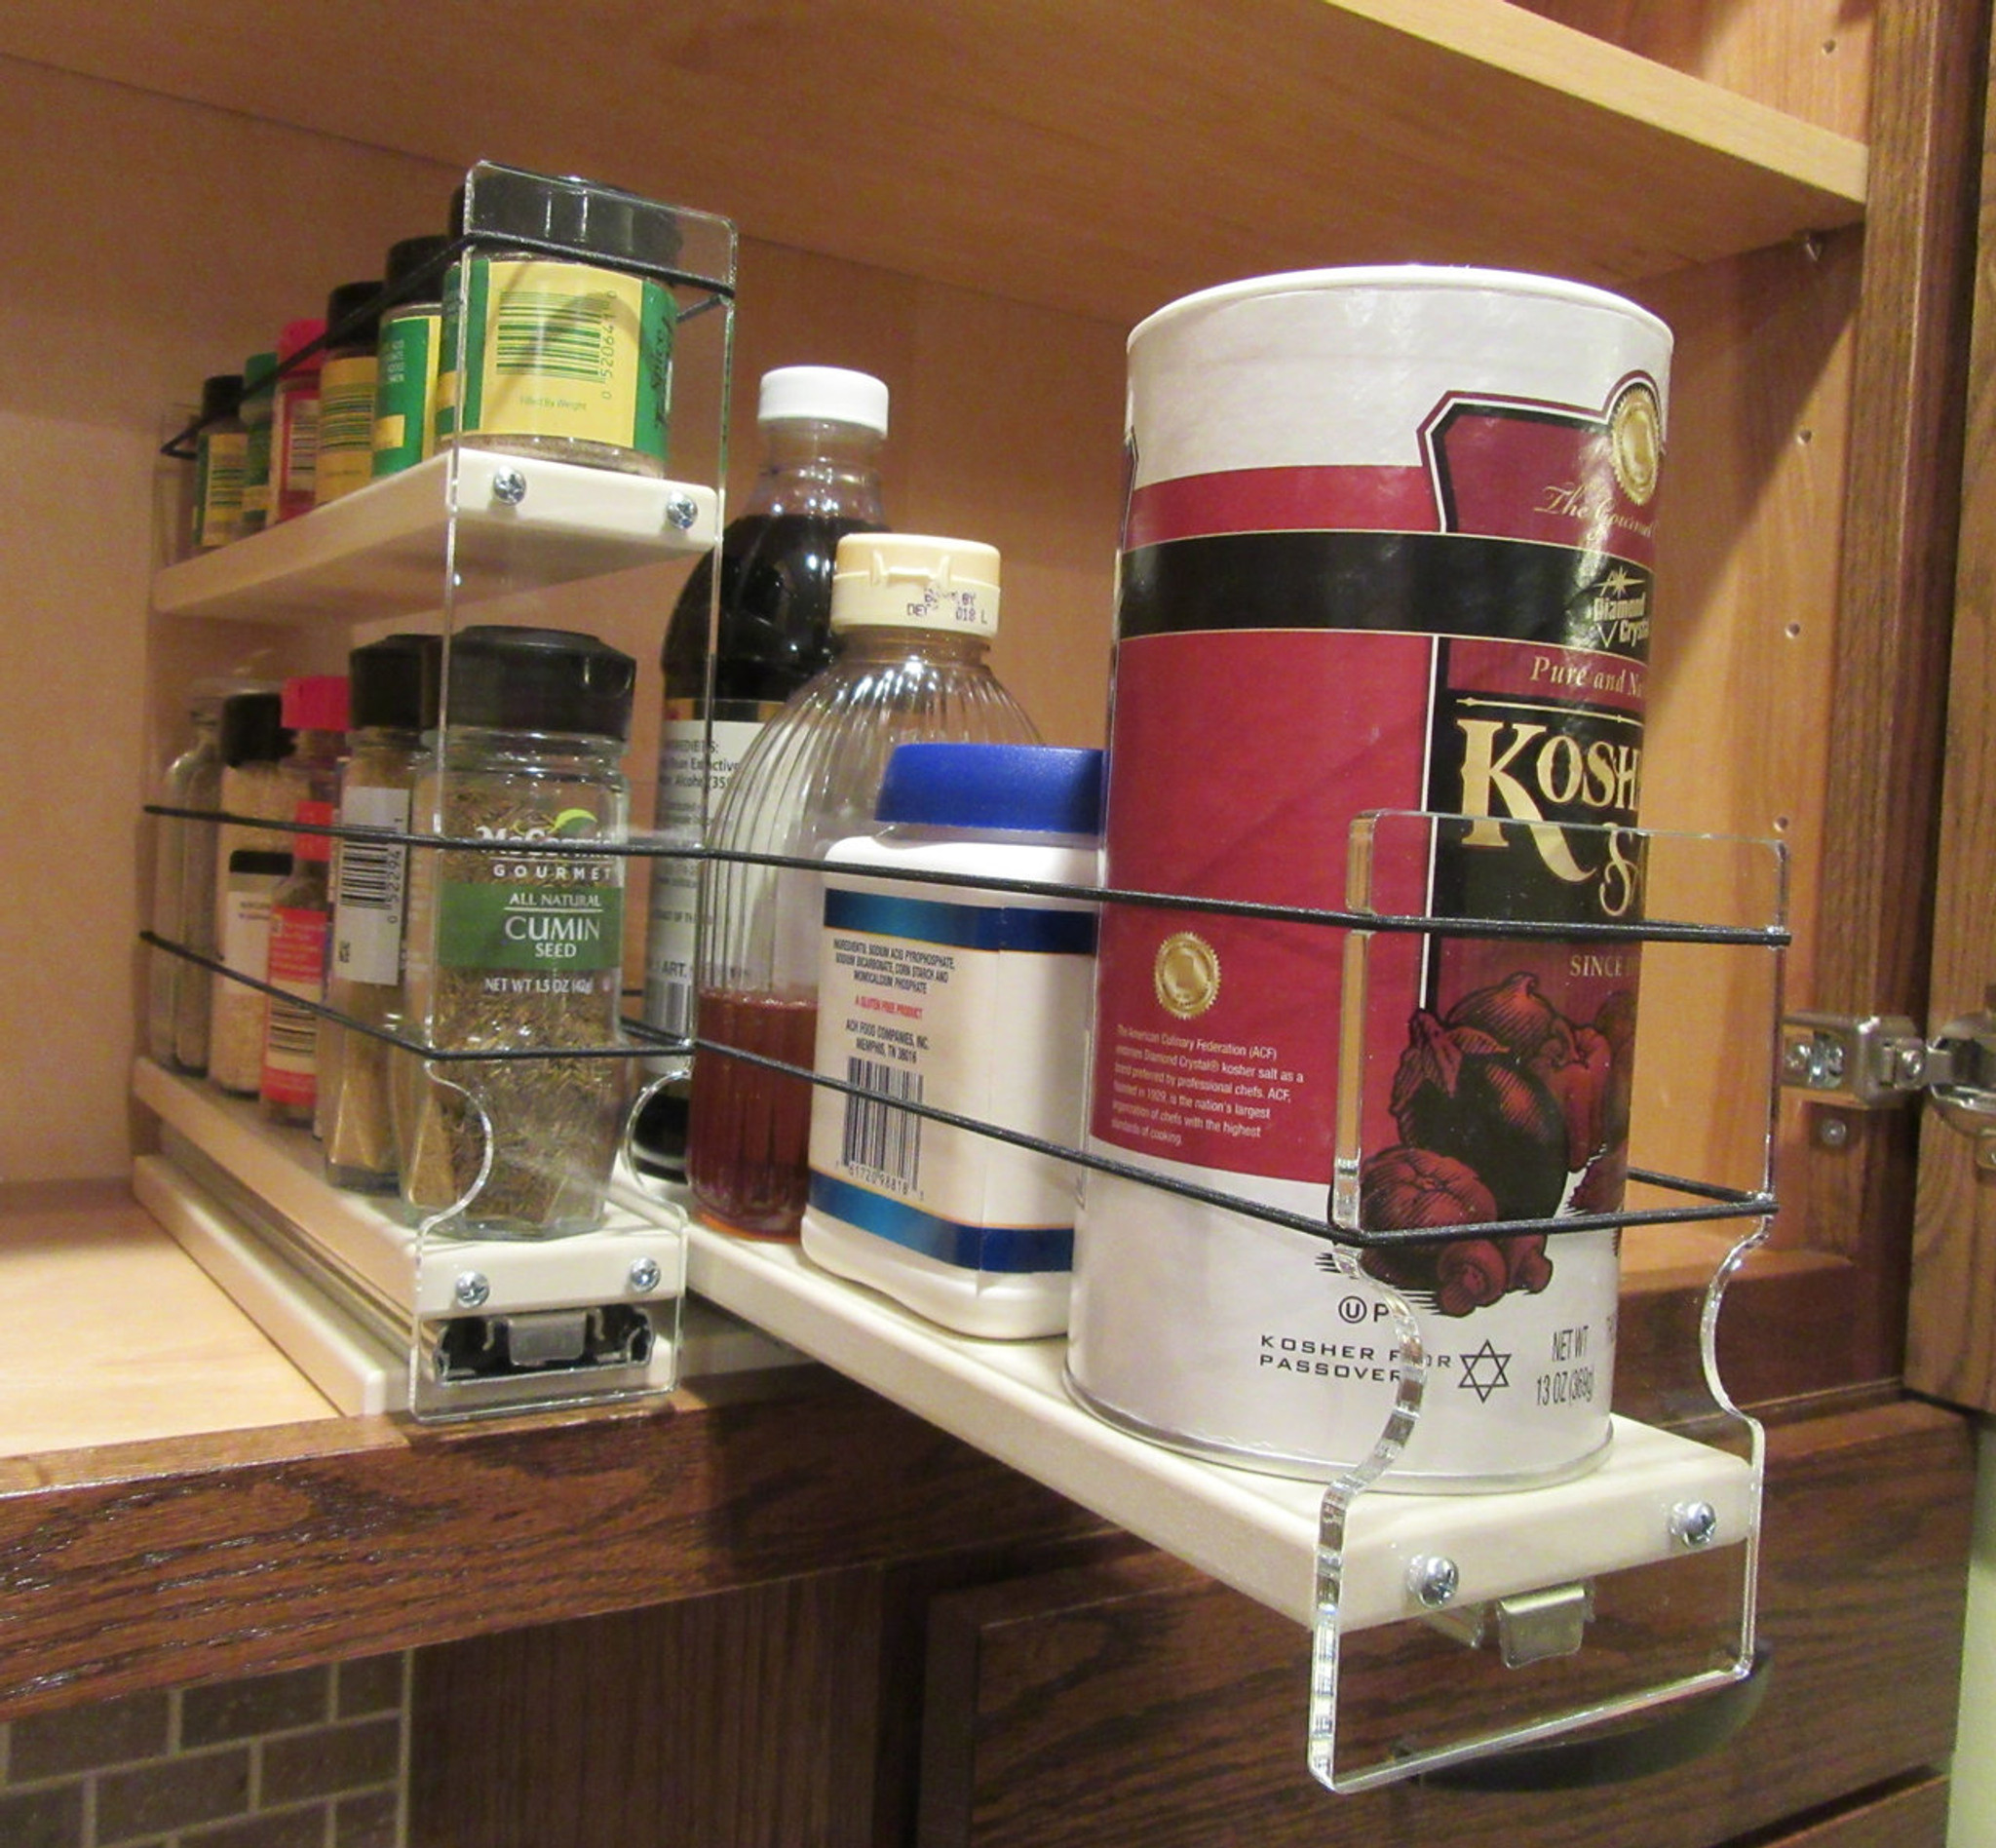 Vertical Spice - 222X1.5X11 DC - Spice Rack - 3 Drawers - 15 Regular/15 Half-Size Capacity - Cabinet Mounted